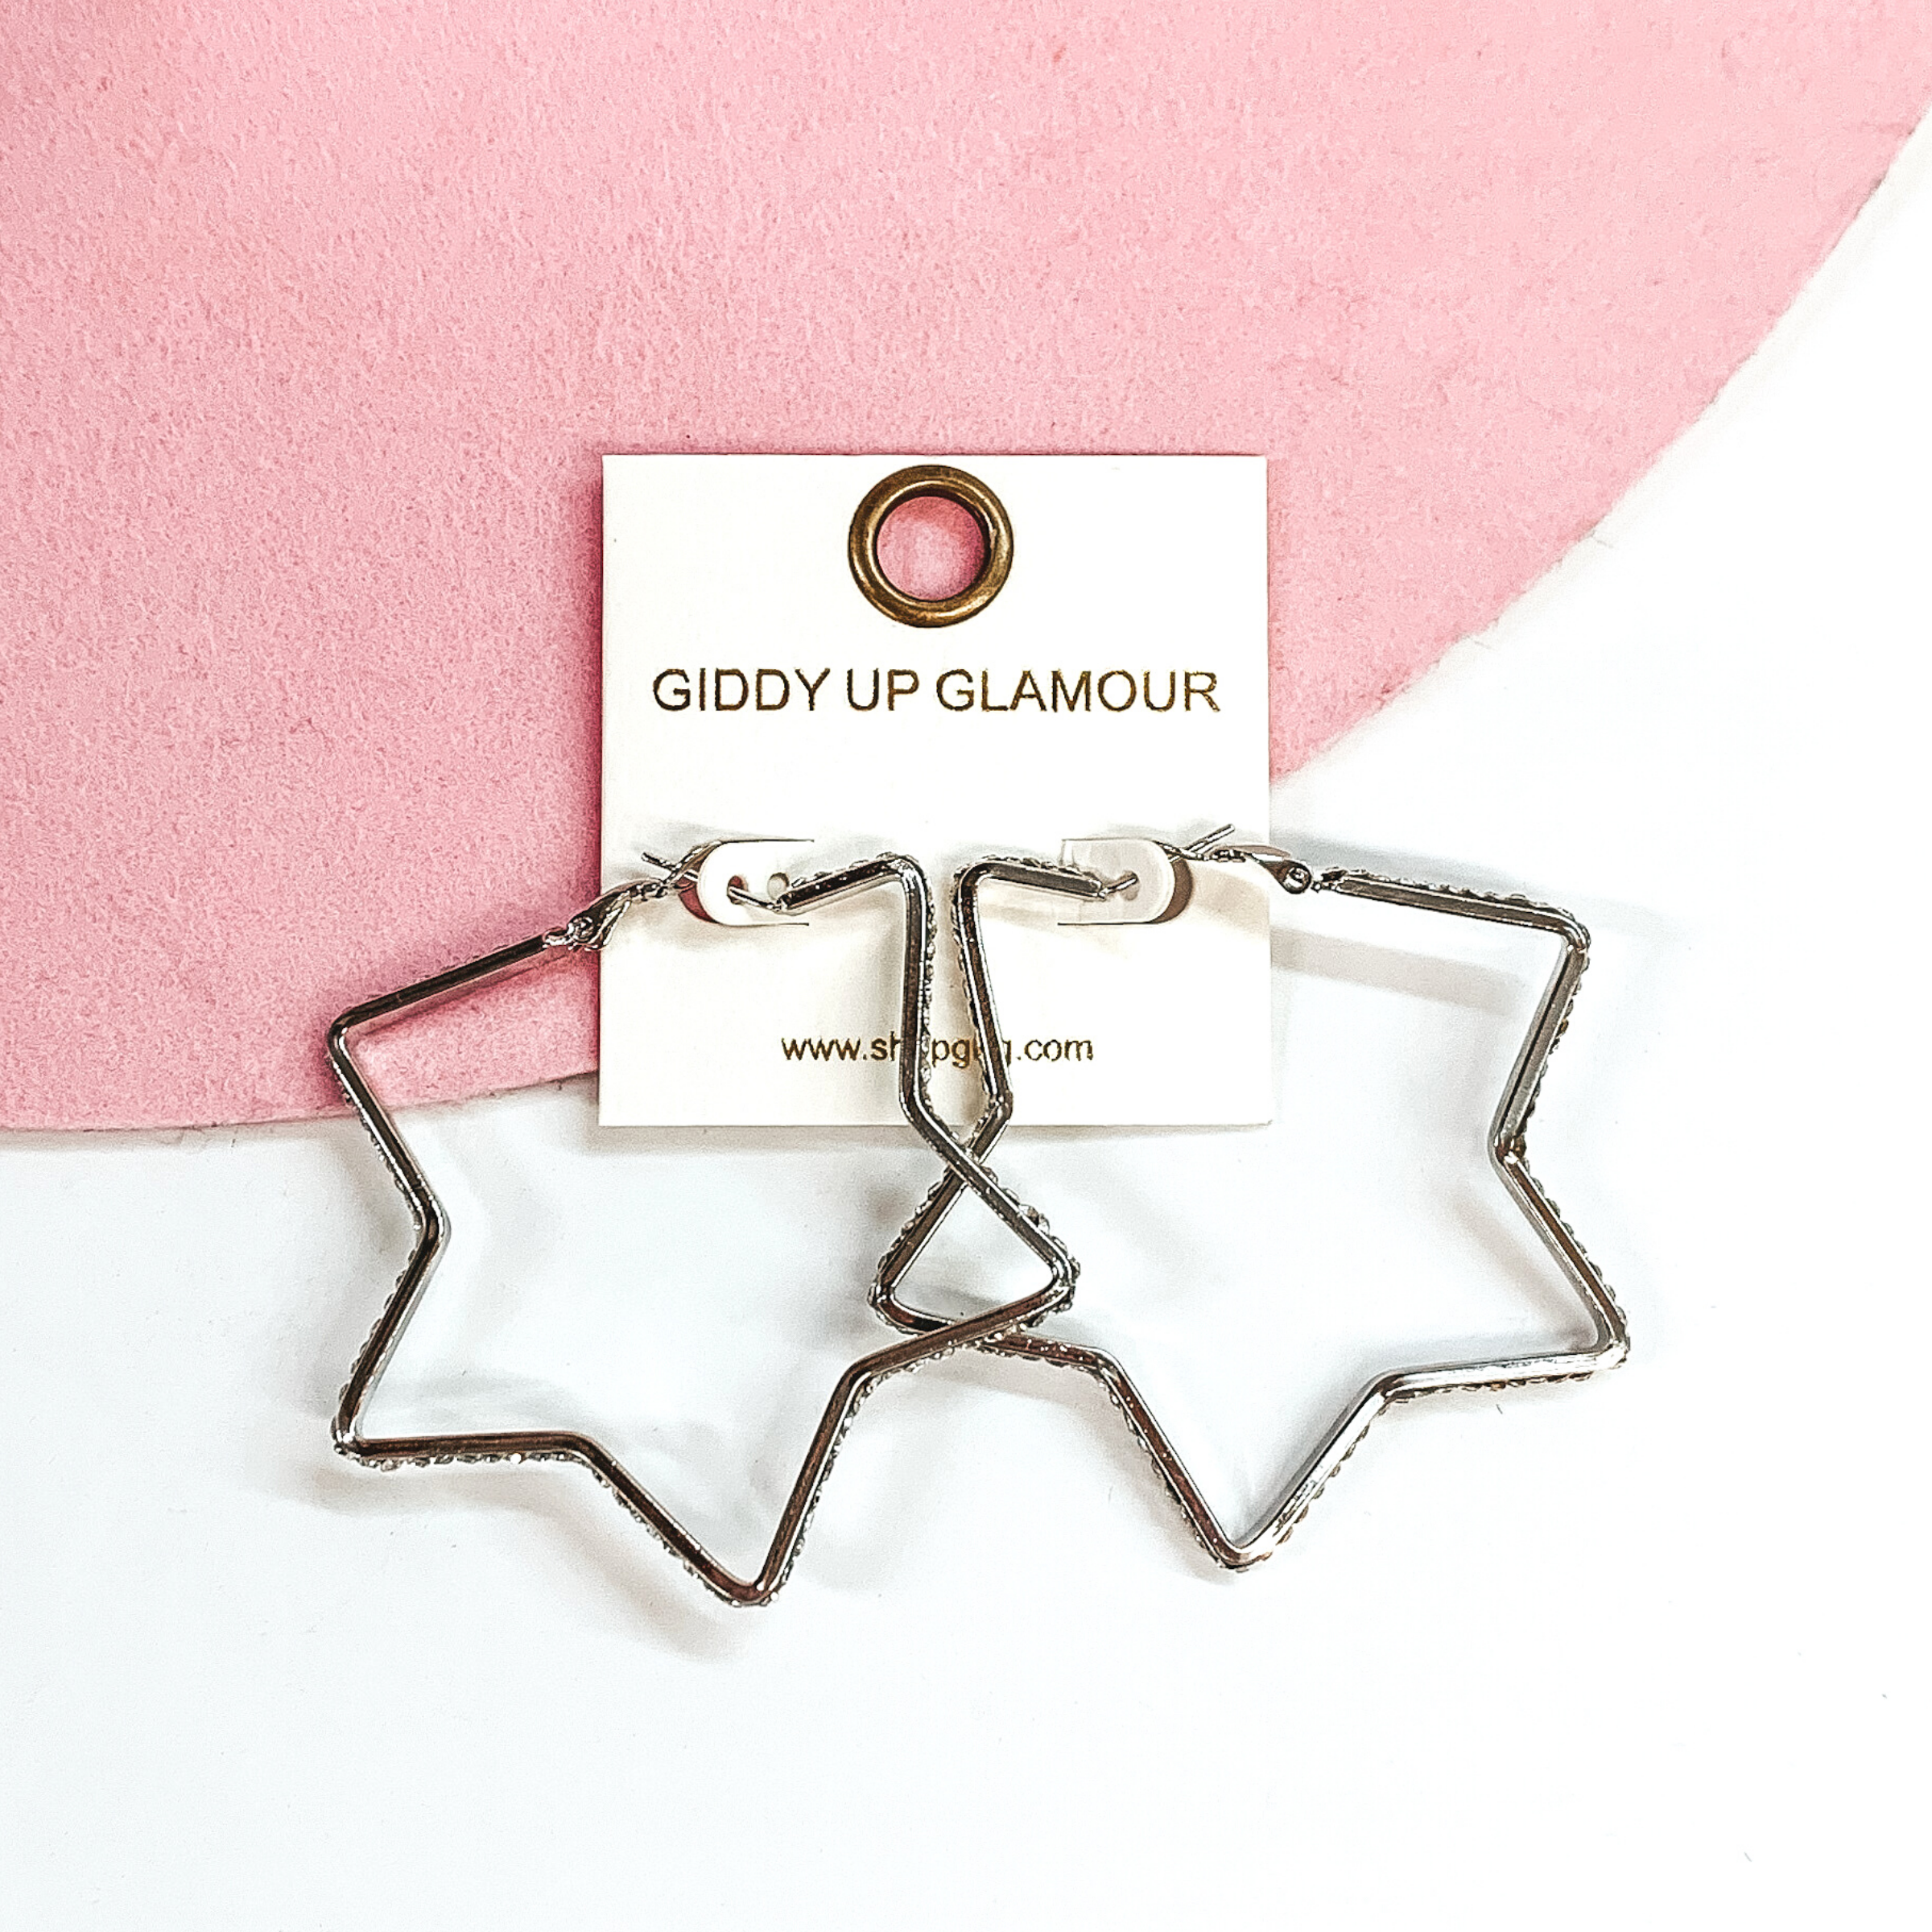 Silver star shaped hoop earrings with clear crystals outlining the outside of the hoops. These earrings are pictured on a white and pink background. 